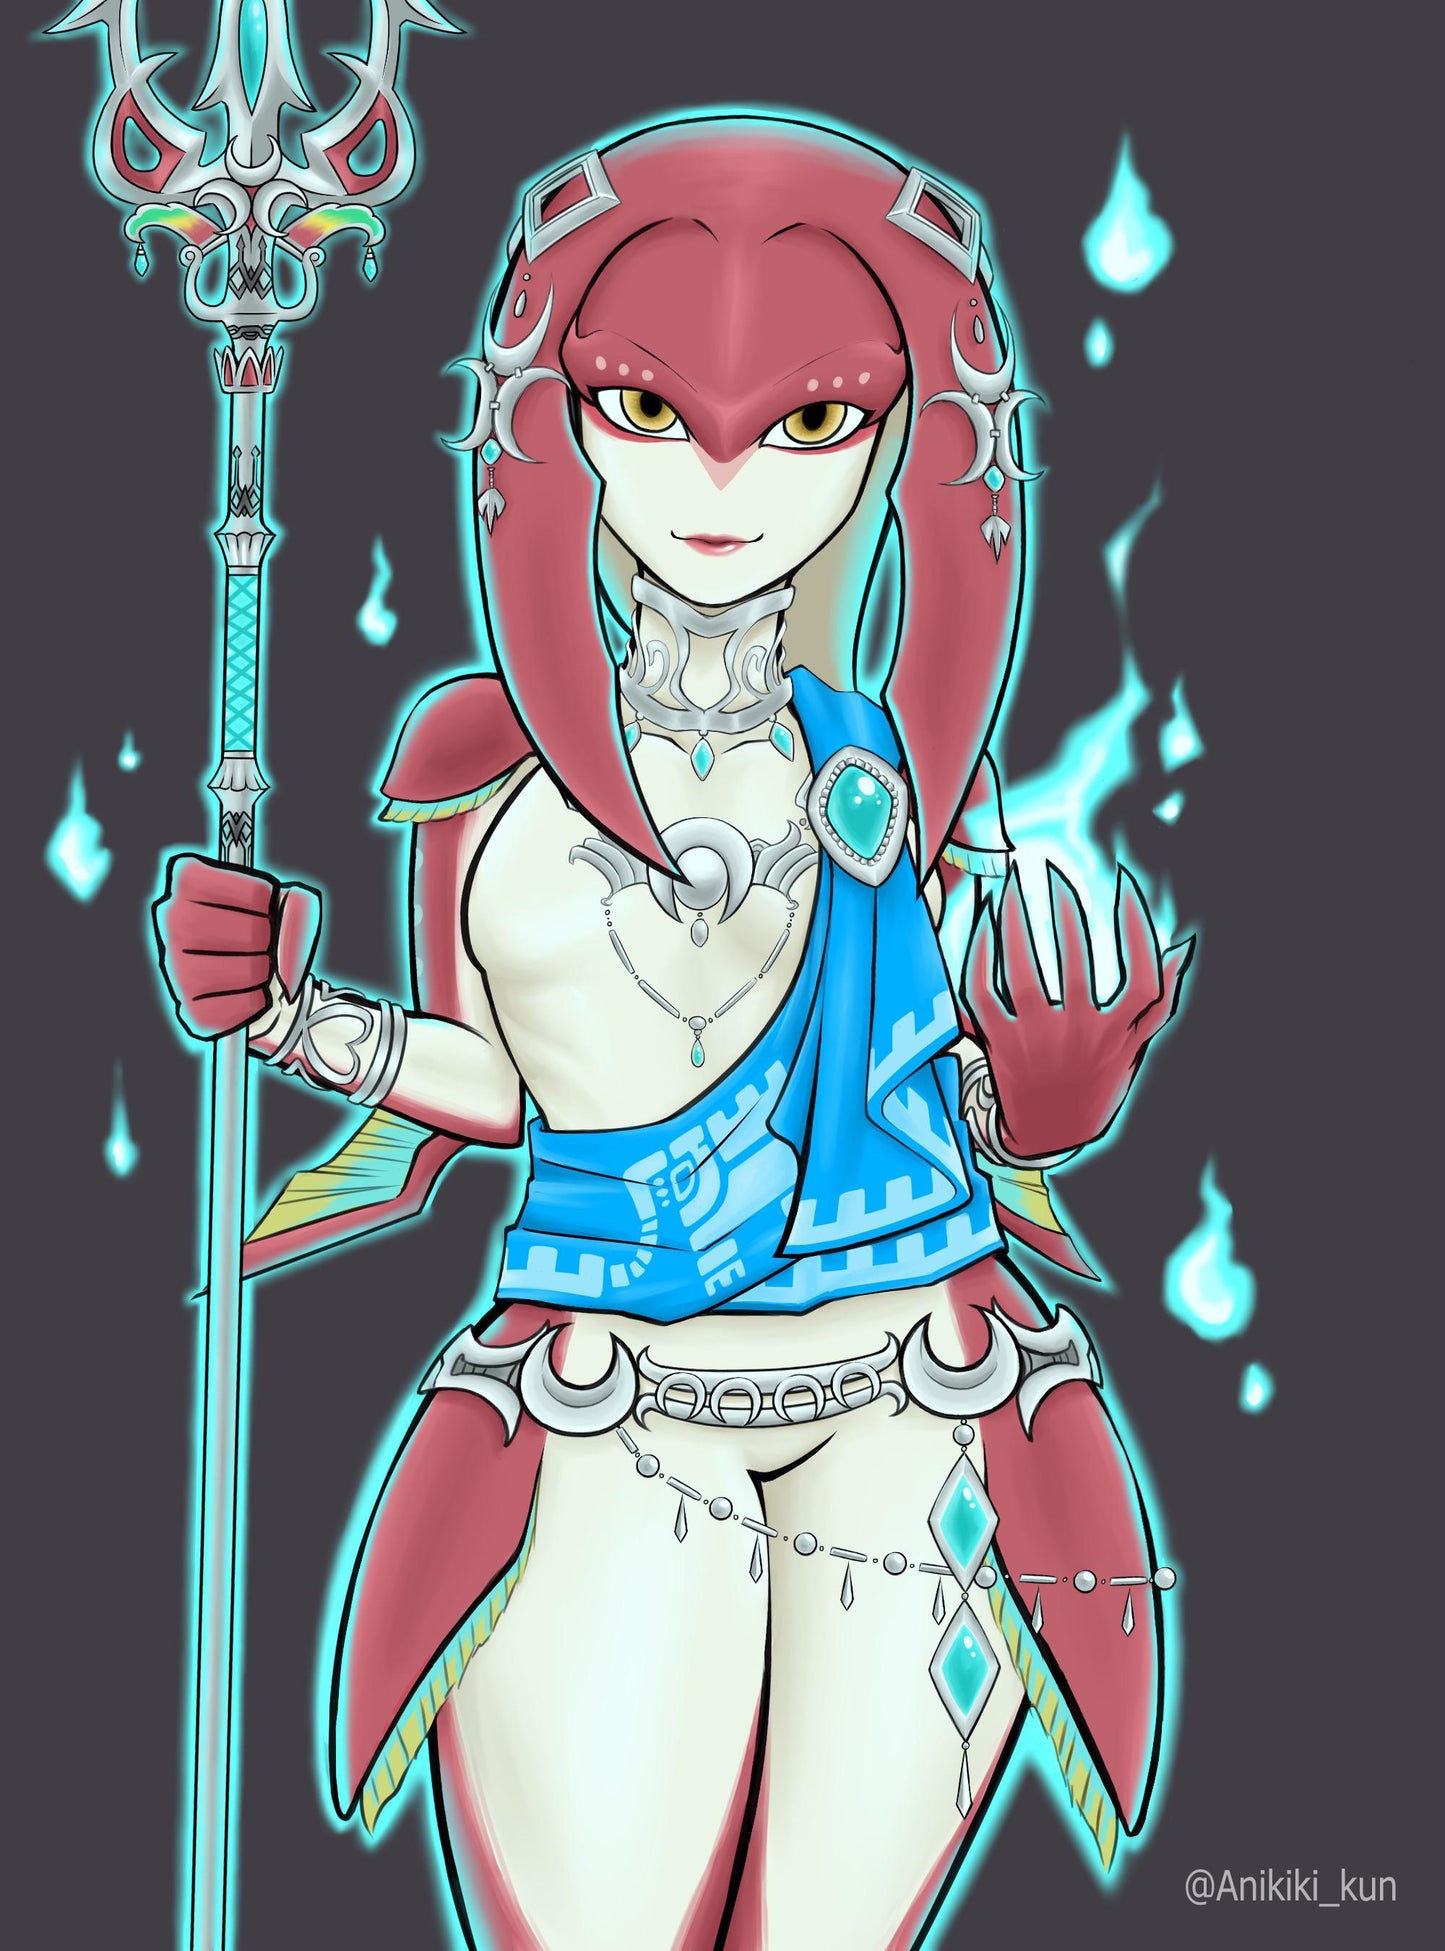 Mipha, from The Legend of Zelda: Breath of the Wild (pre-order)